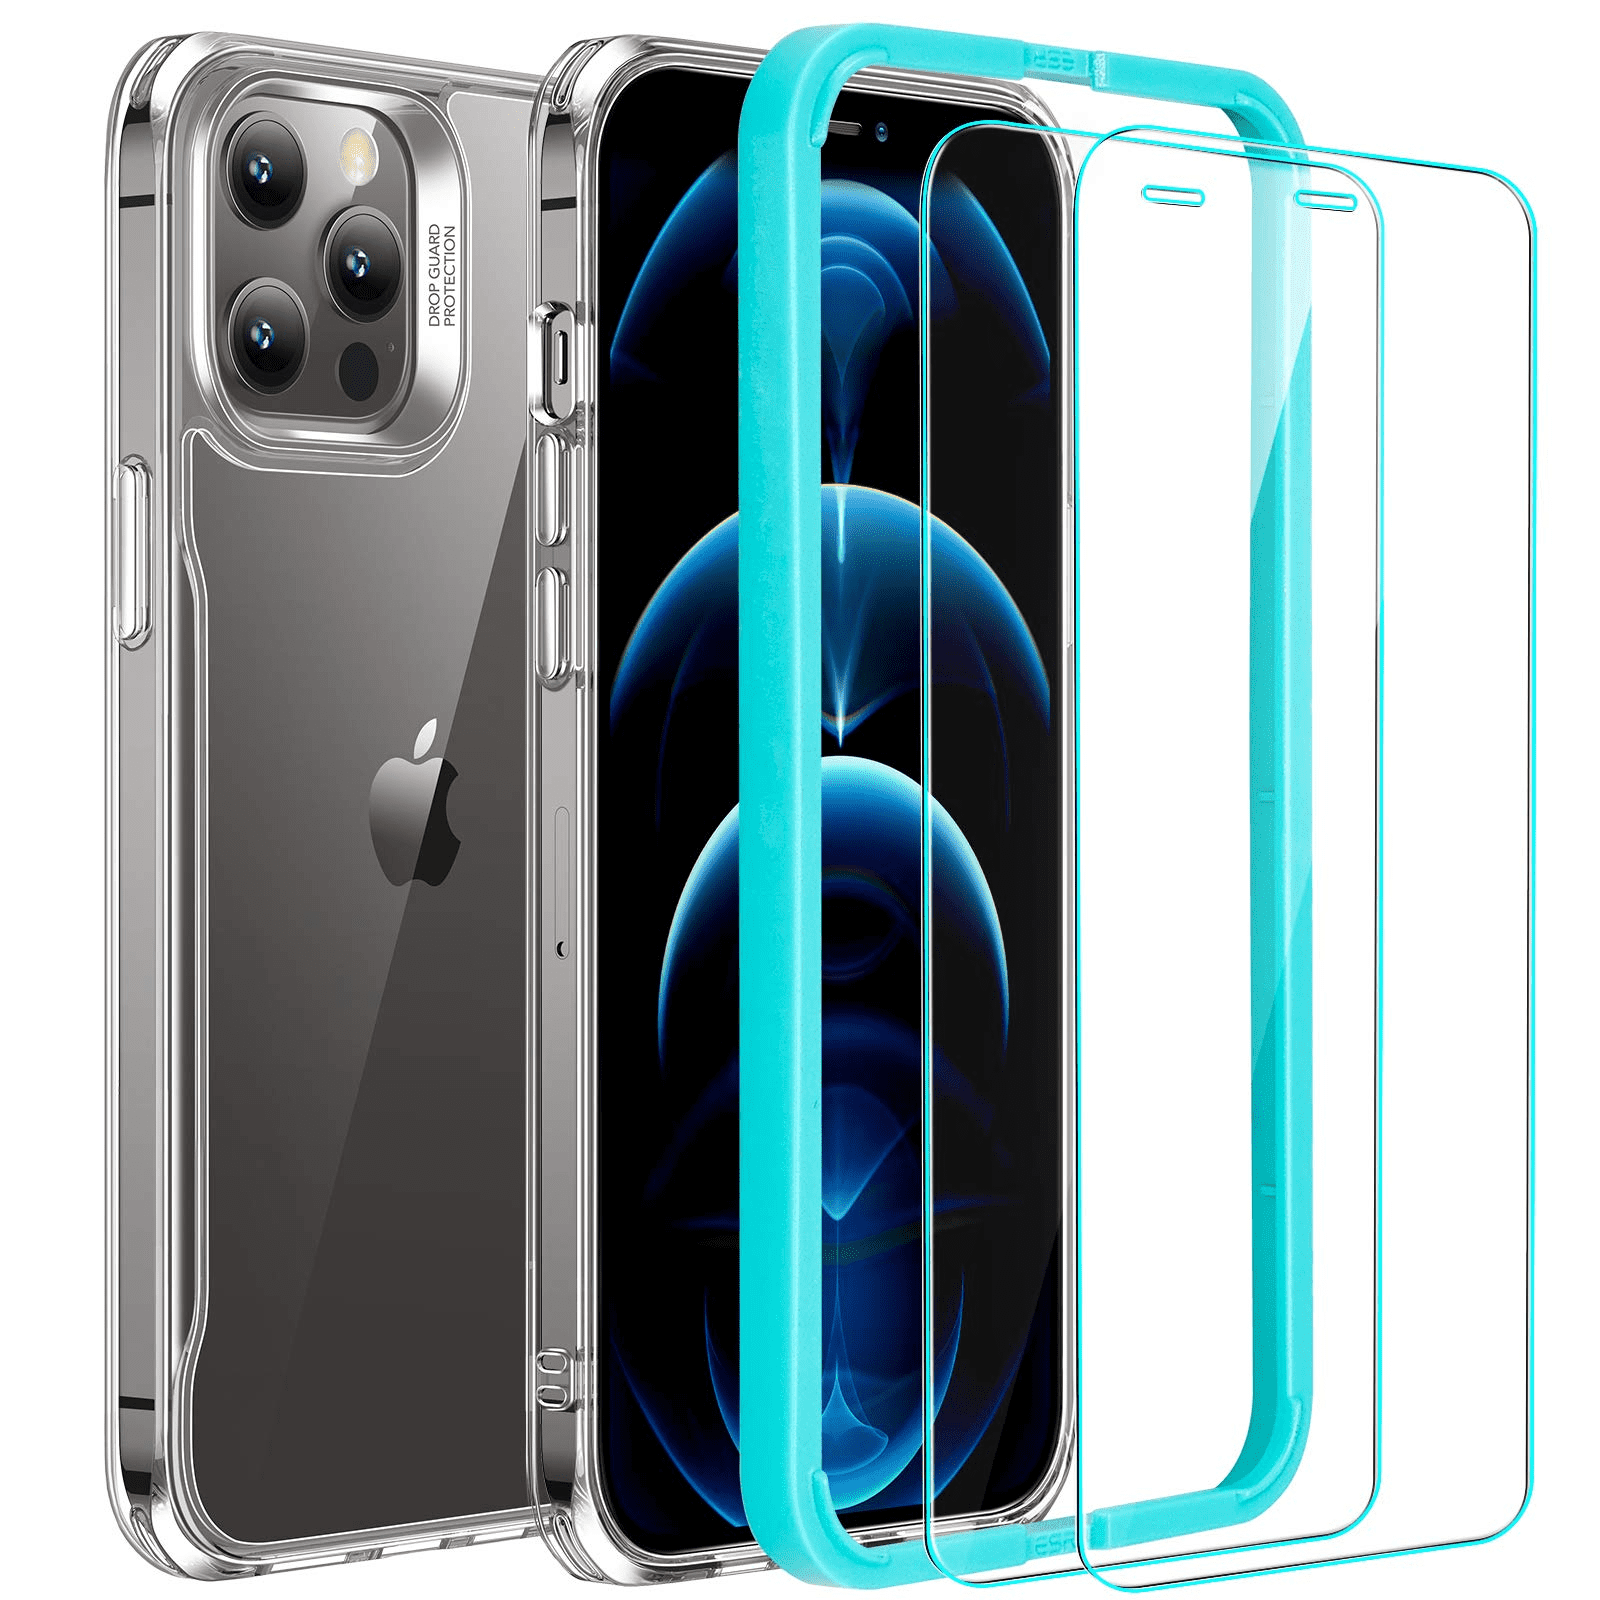 Full-Body Hybrid Protection for iPhone 2020 ESR Alliance Series Designed for iPhone 12 Pro Max Case 6.7-Inch 2 Tempered Glass Screen Protectors Shock-Absorbing Clear Scratch-Resistant 